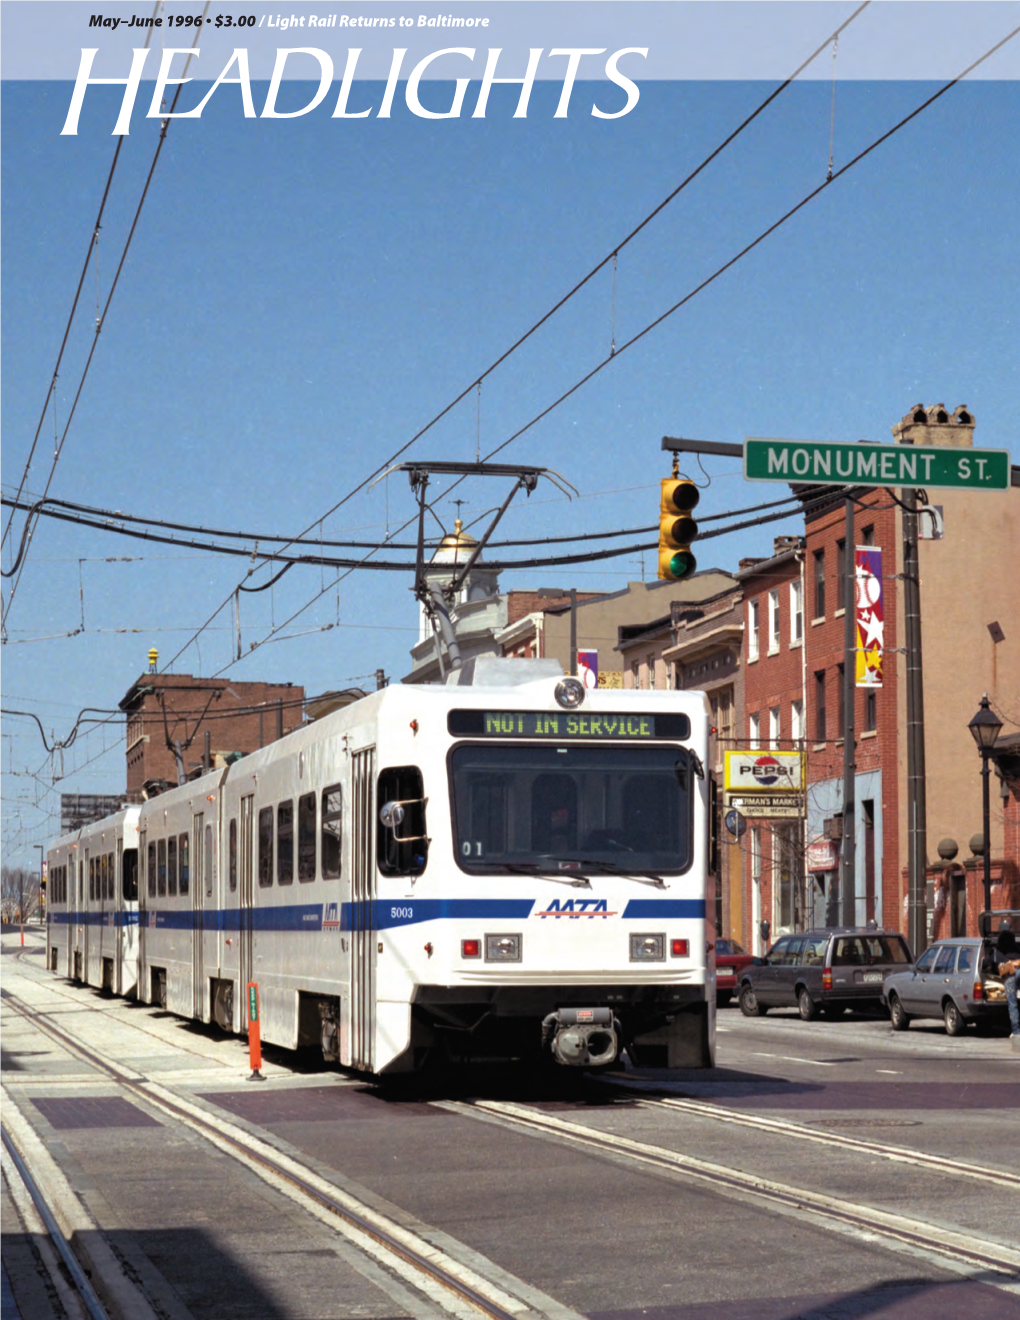 May–June 1996 • $3.00 / Light Rail Returns to Baltimore Headligs Ht the Magazine of Electric Railways Published Since 1939